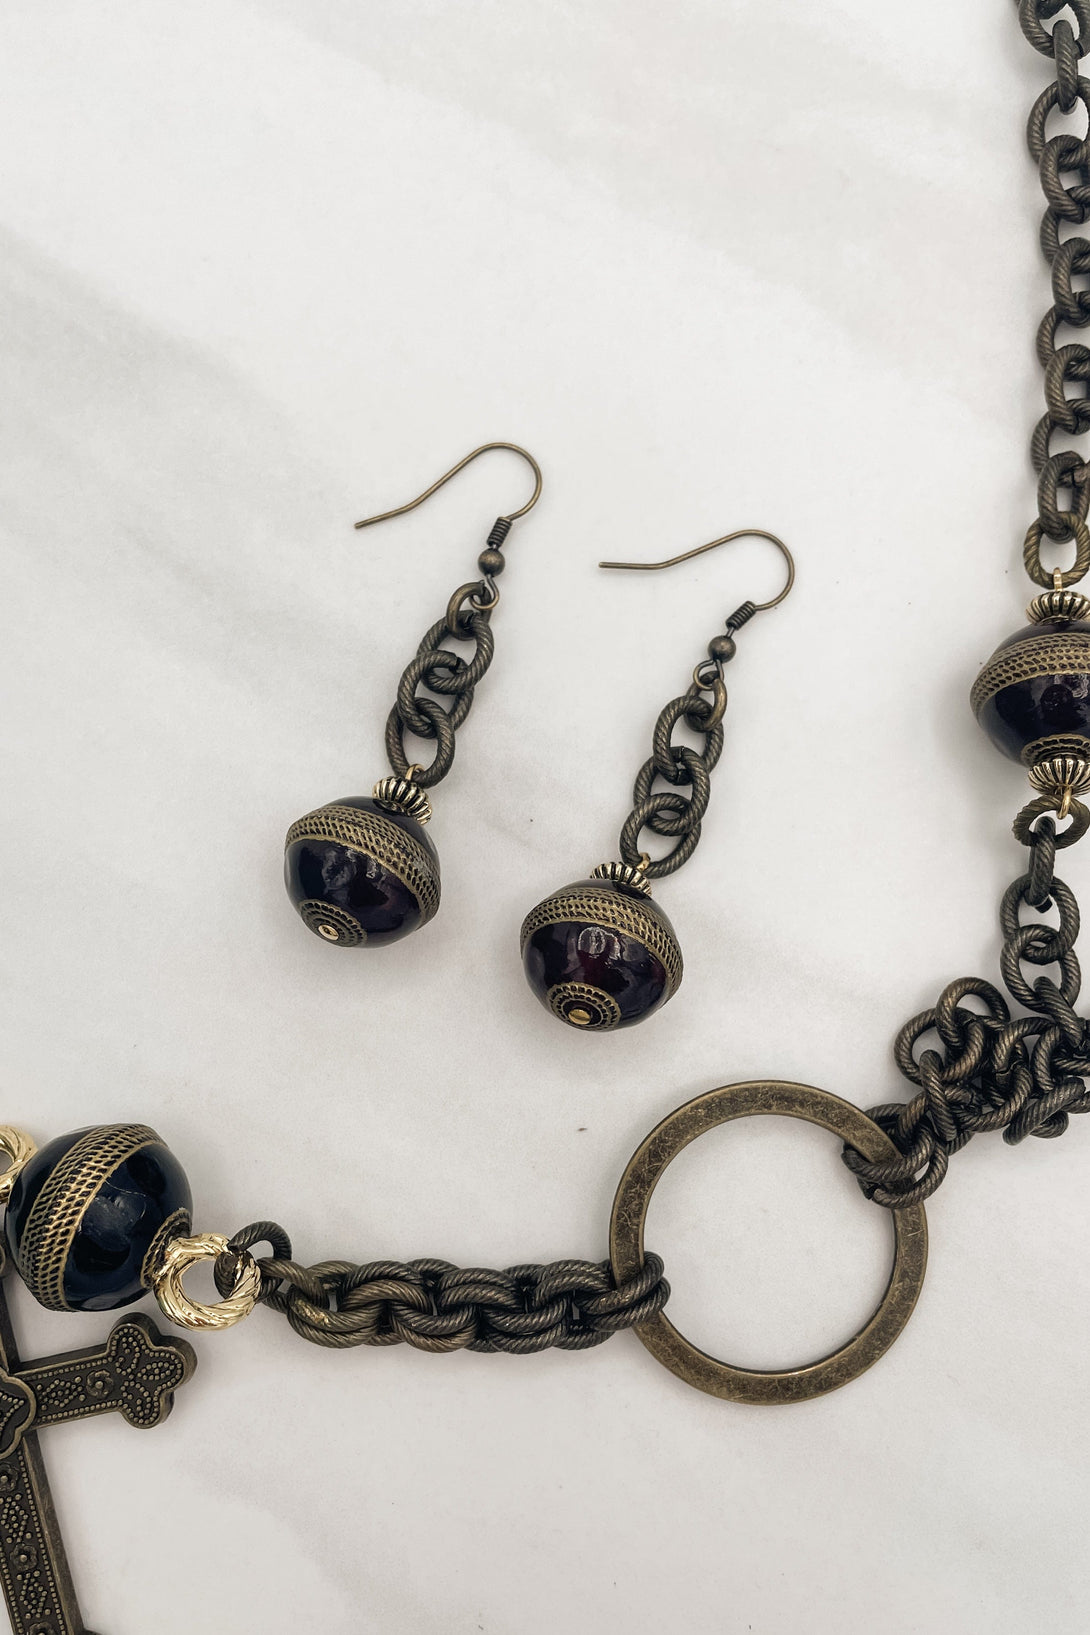 Antique Gold Etched Cable Earrings with Vintage Italian Beads